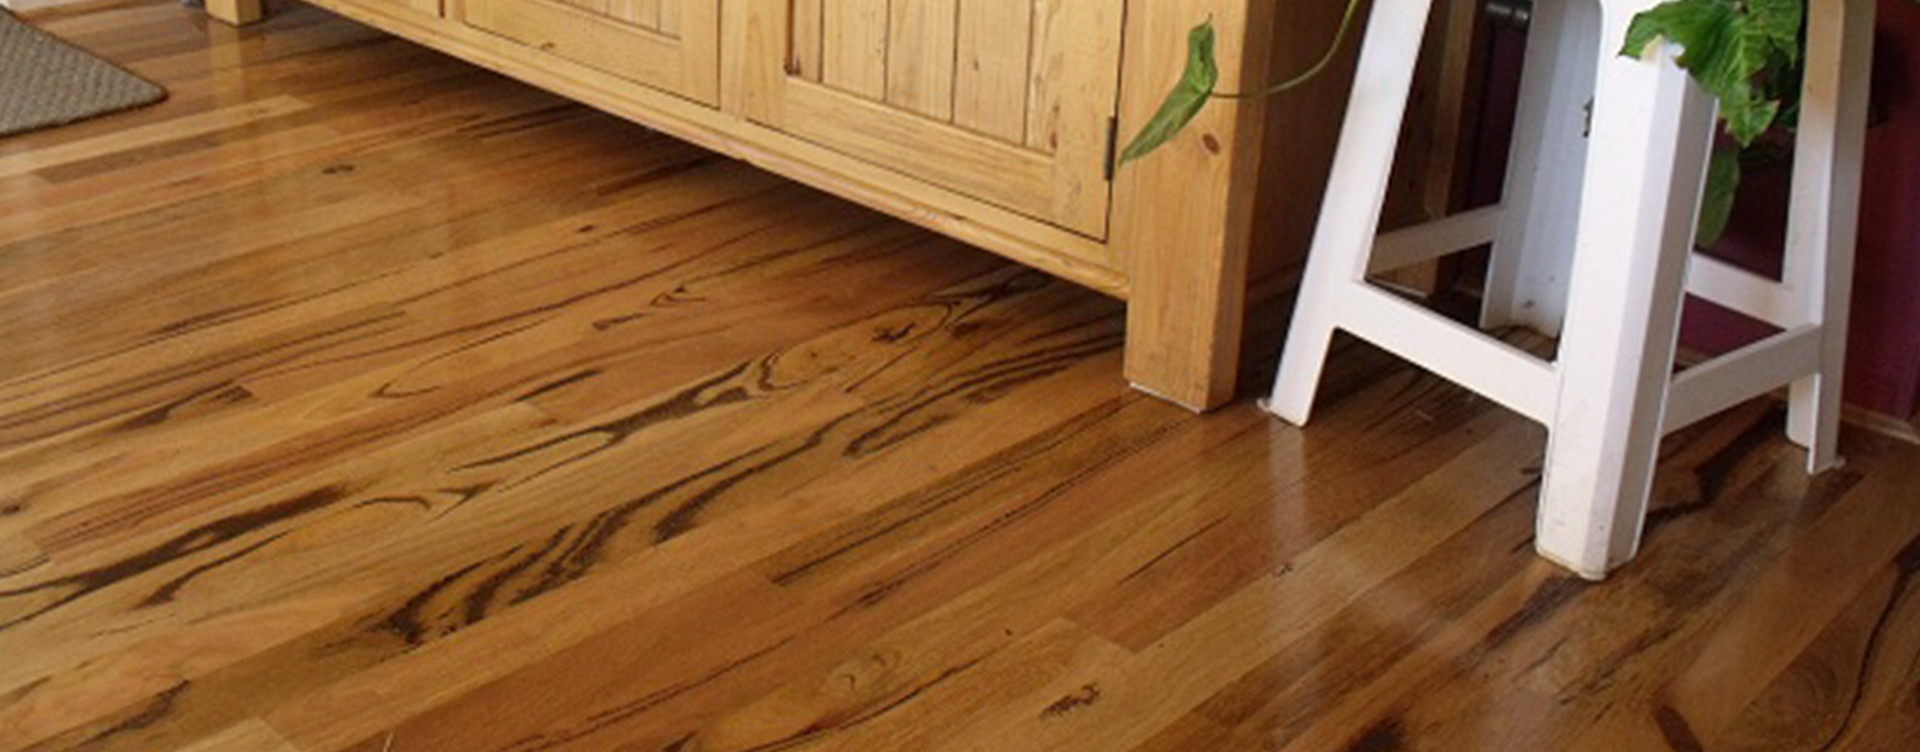 hardwood timber flooring prices of timber flooring perth coastal flooring wa quality wooden with view more photos